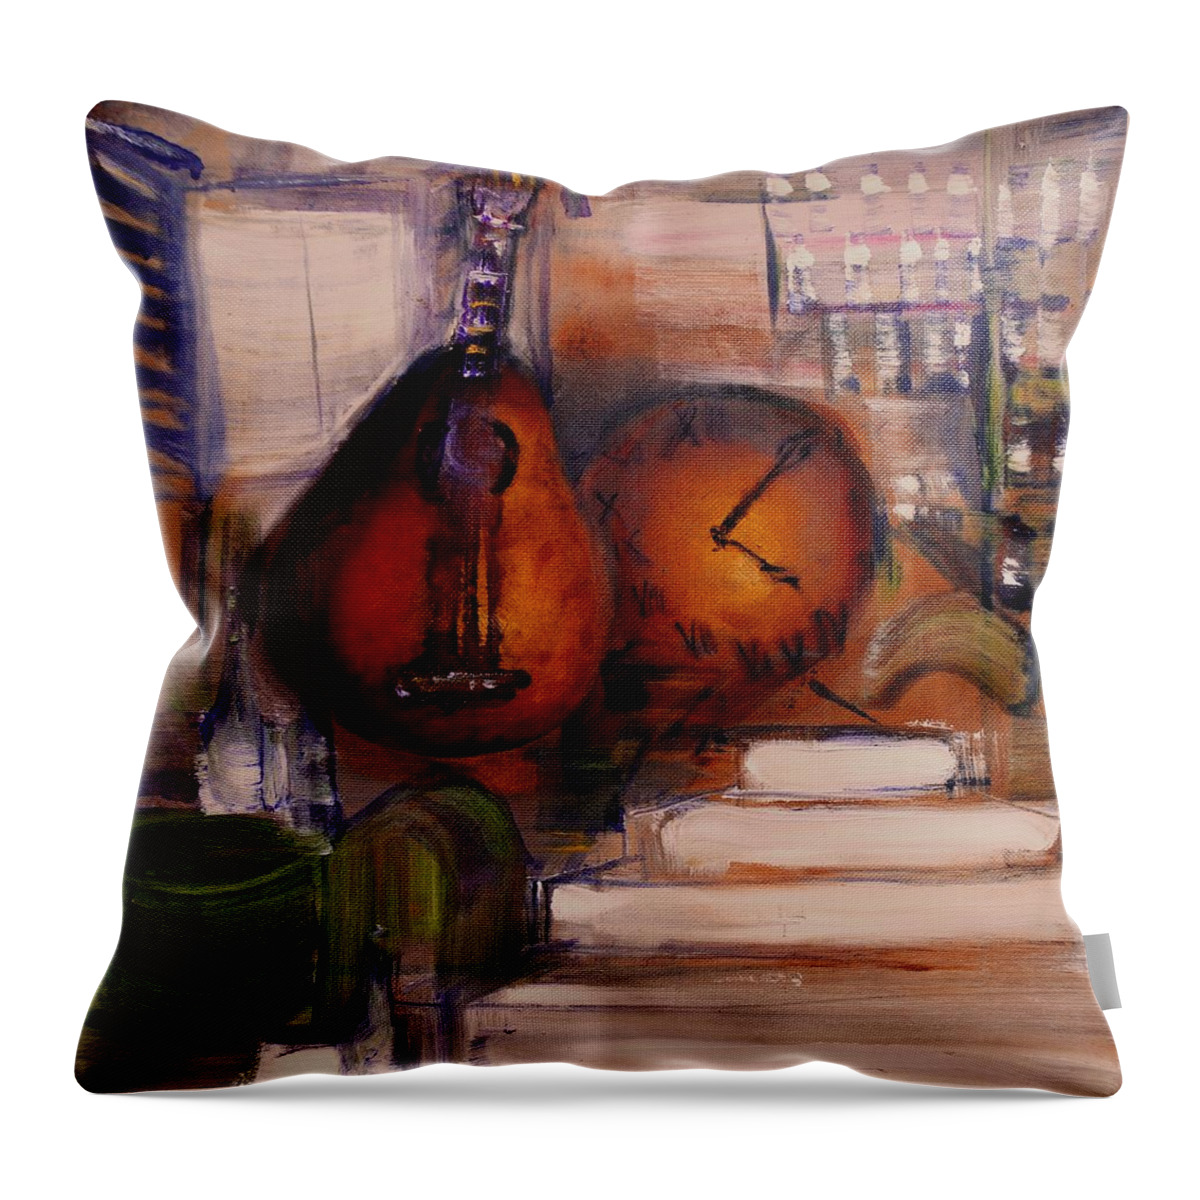 Stil Life Throw Pillow featuring the painting The Mandolin by Evelina Popilian